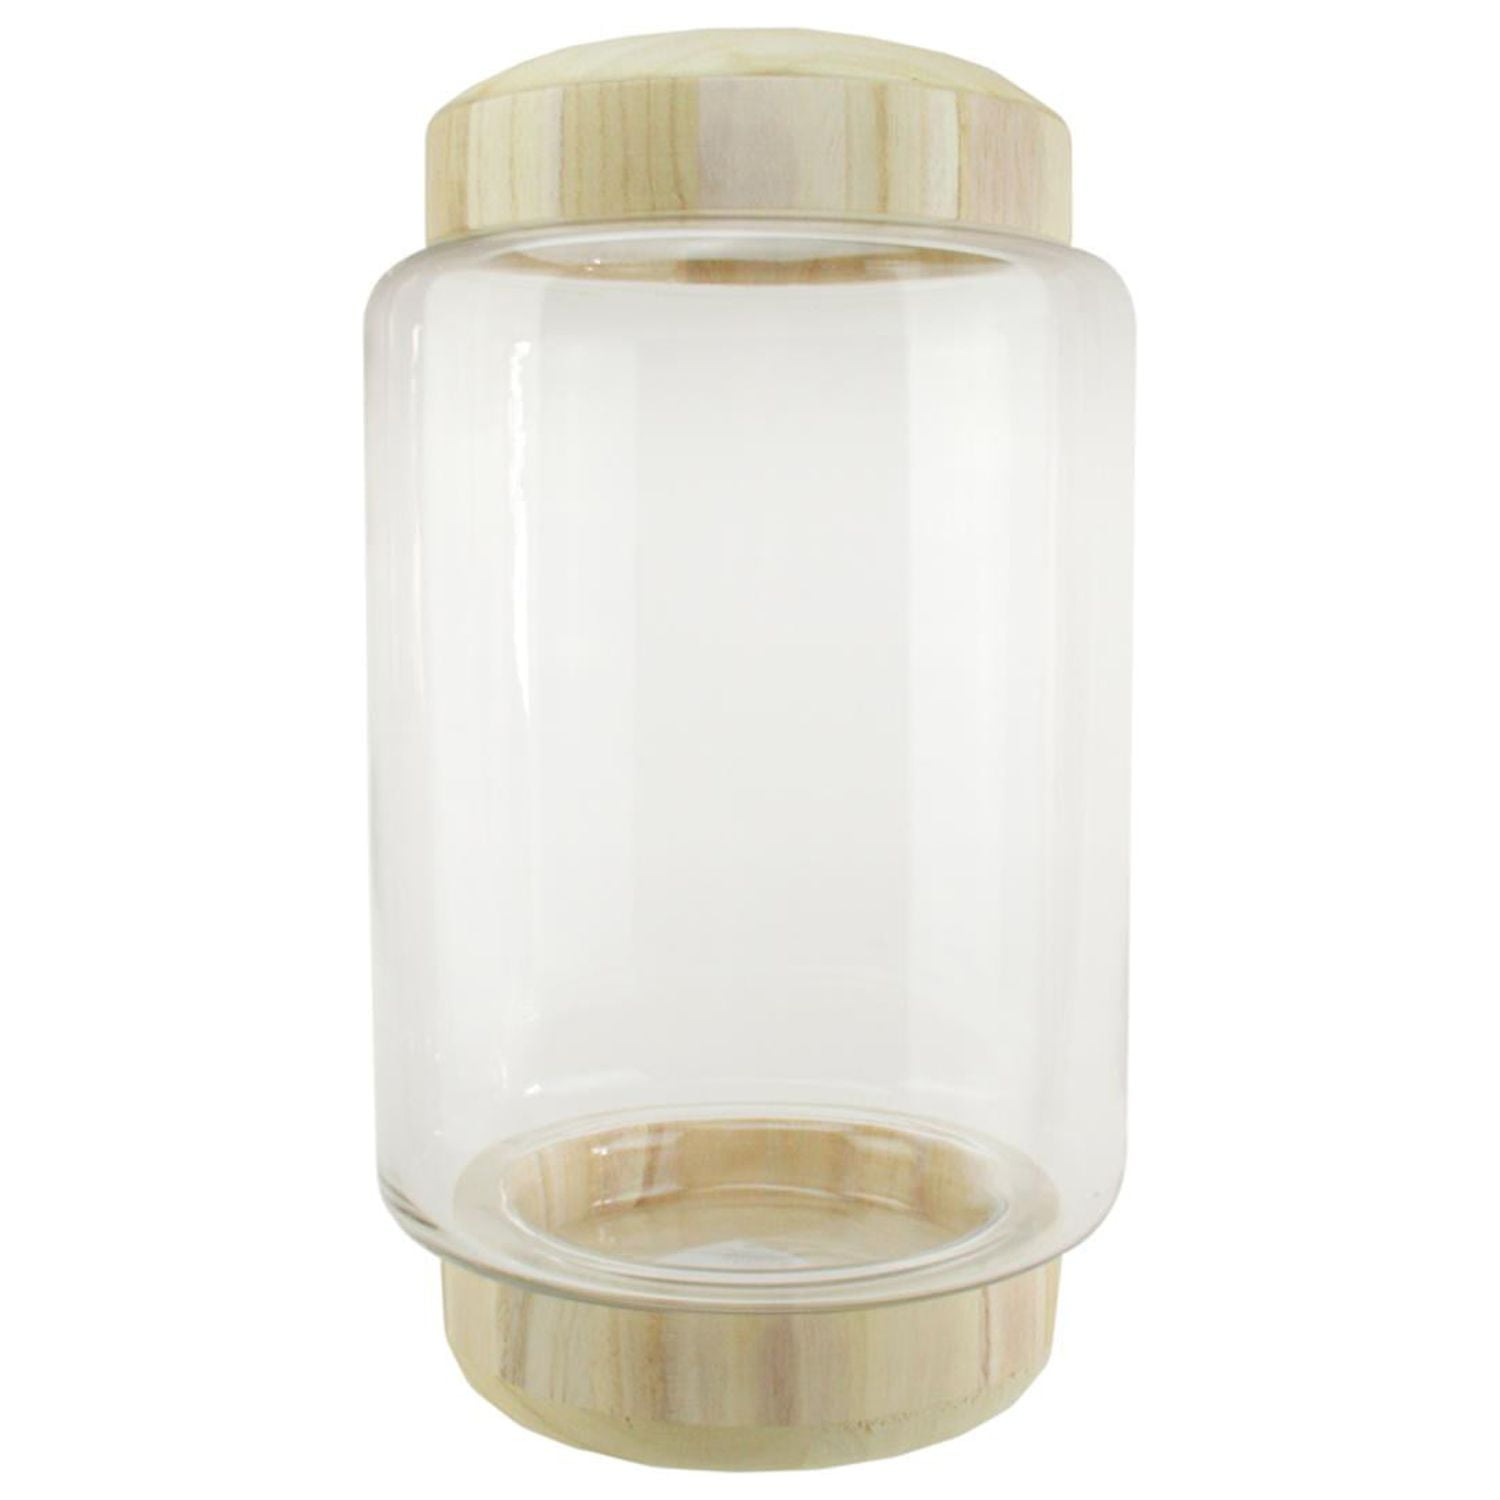 Buy Sandwich Container Stash Jar Latchtop Stashjar. Apothecary Online in  India 